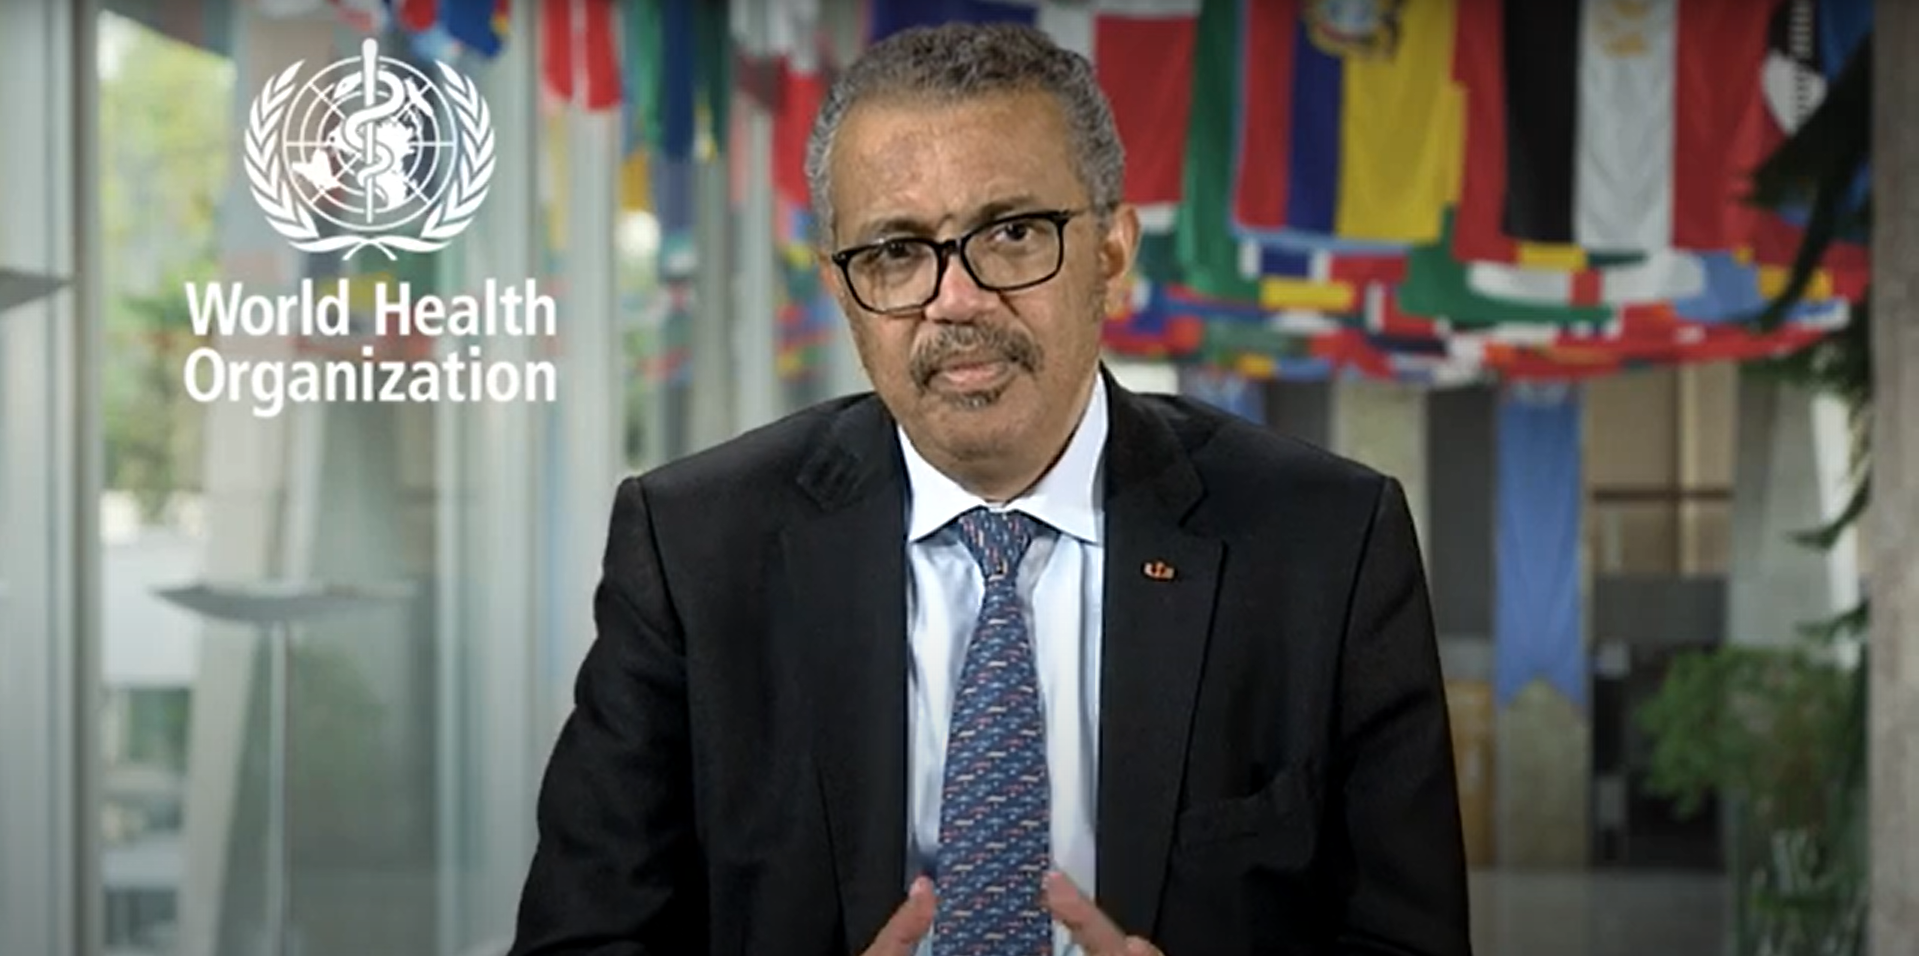 Dr Tedros Adhanom Ghebreyesus, Director-General of WHO welcomes the opening of The Trinity Challenge